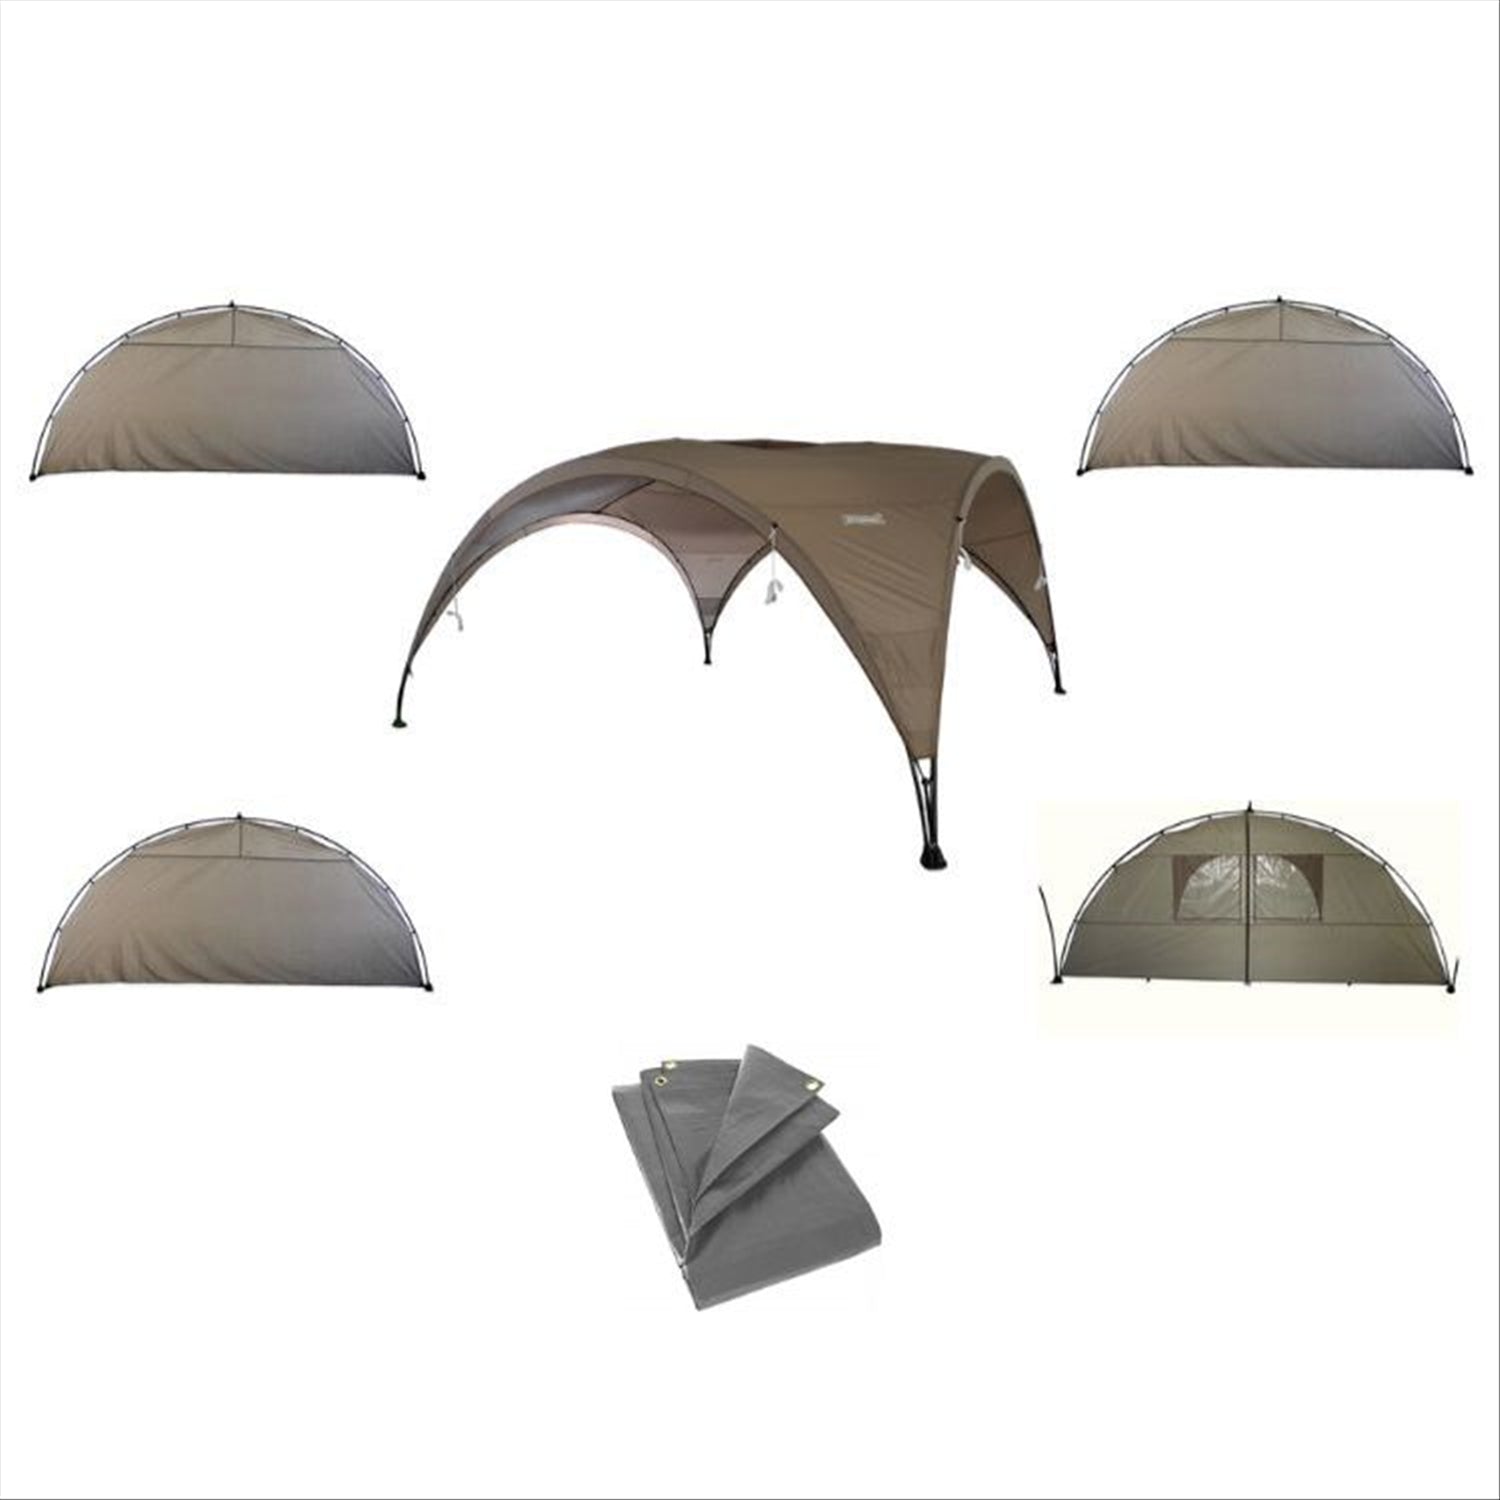 Orson Core Shelter 4.5m - Special Combo Deal